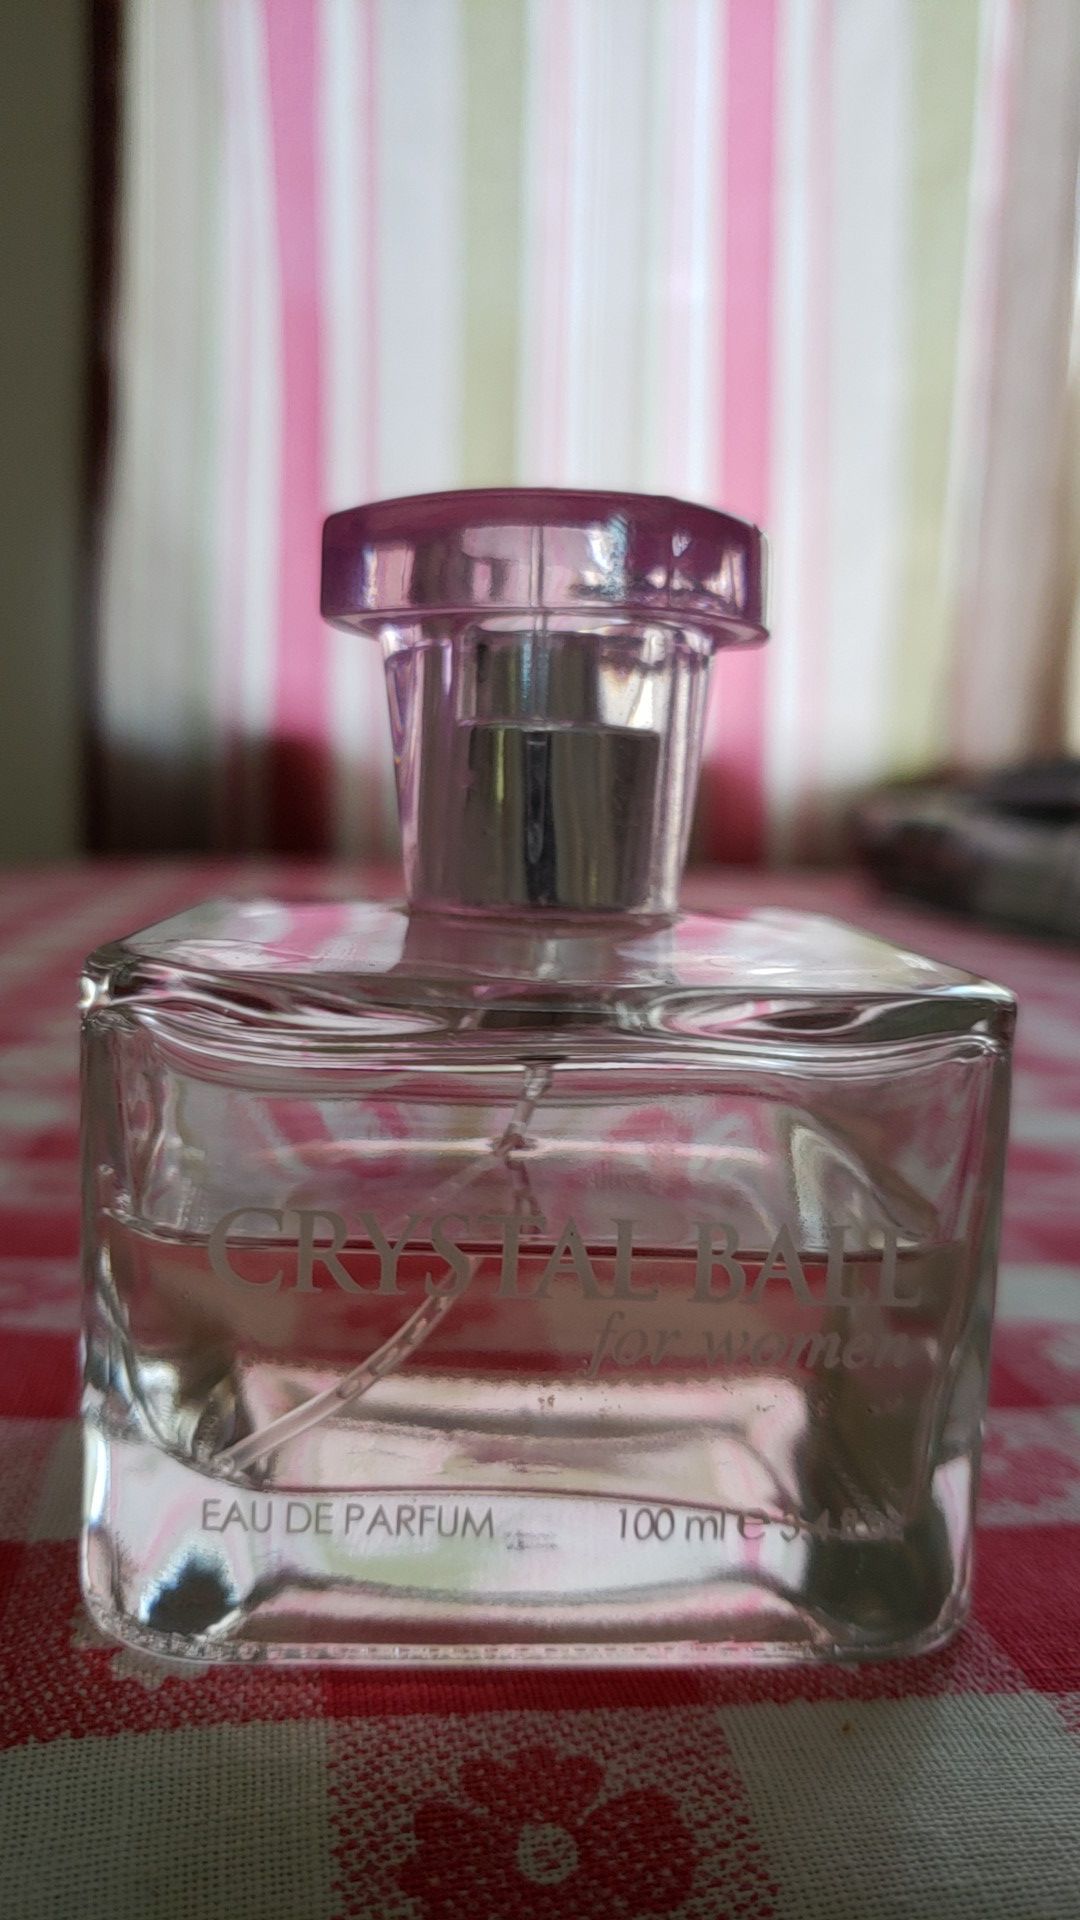 Crystal ball perfume for Sale in Visalia, CA - OfferUp